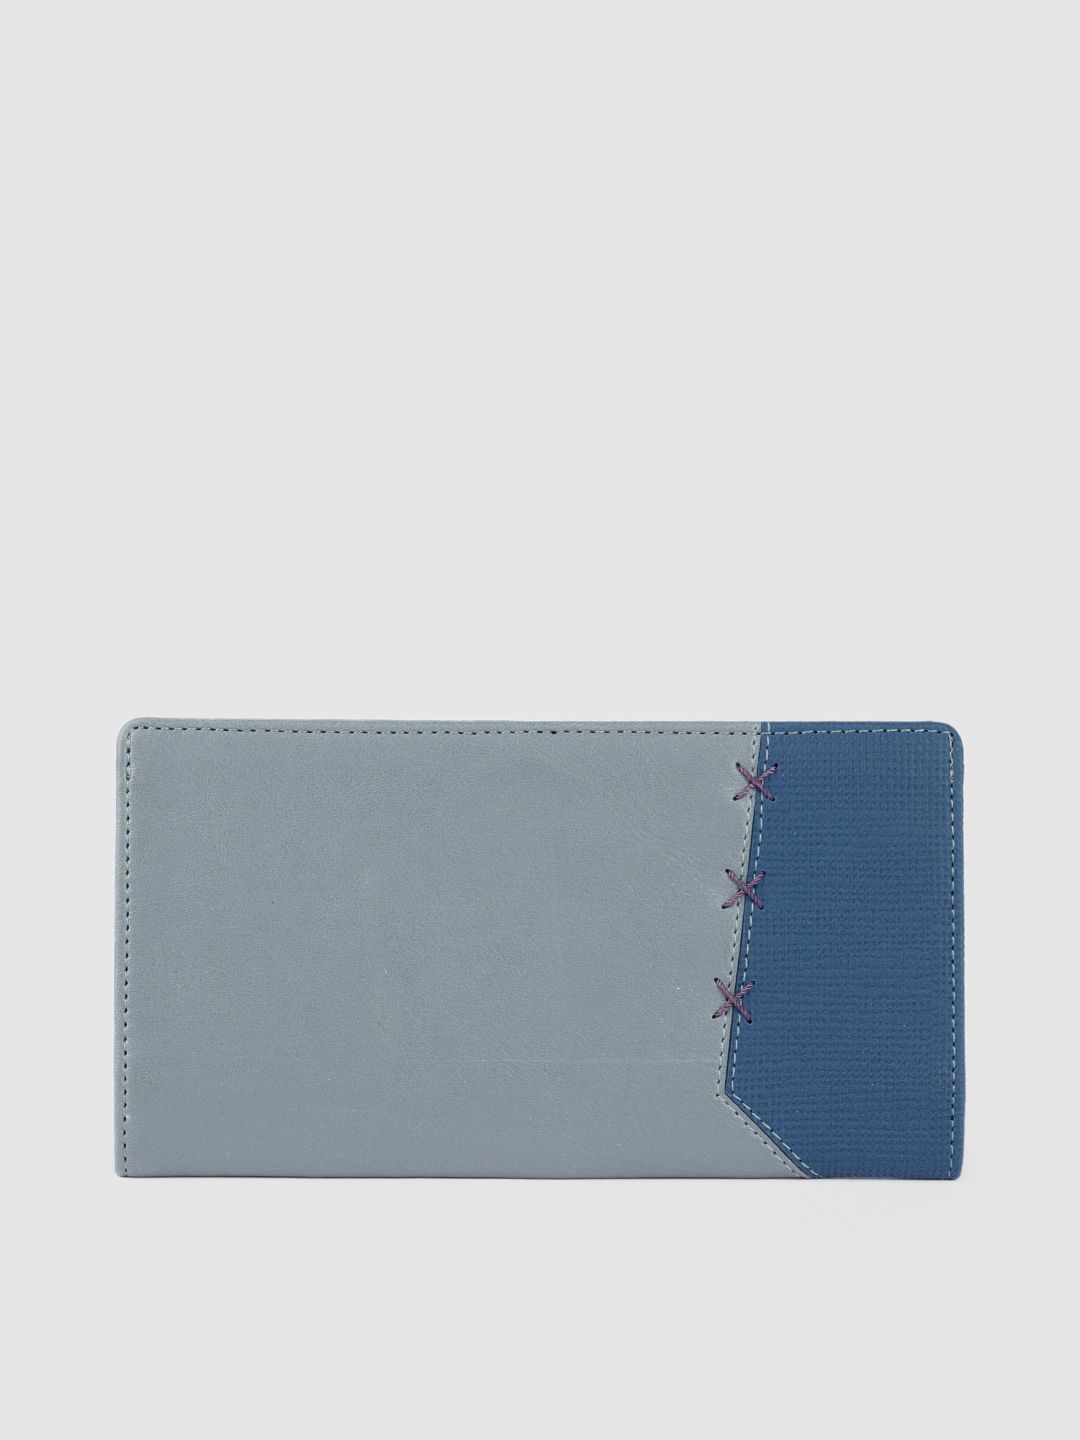 Baggit Women Blue Colourblocked Two Fold Wallet Price in India